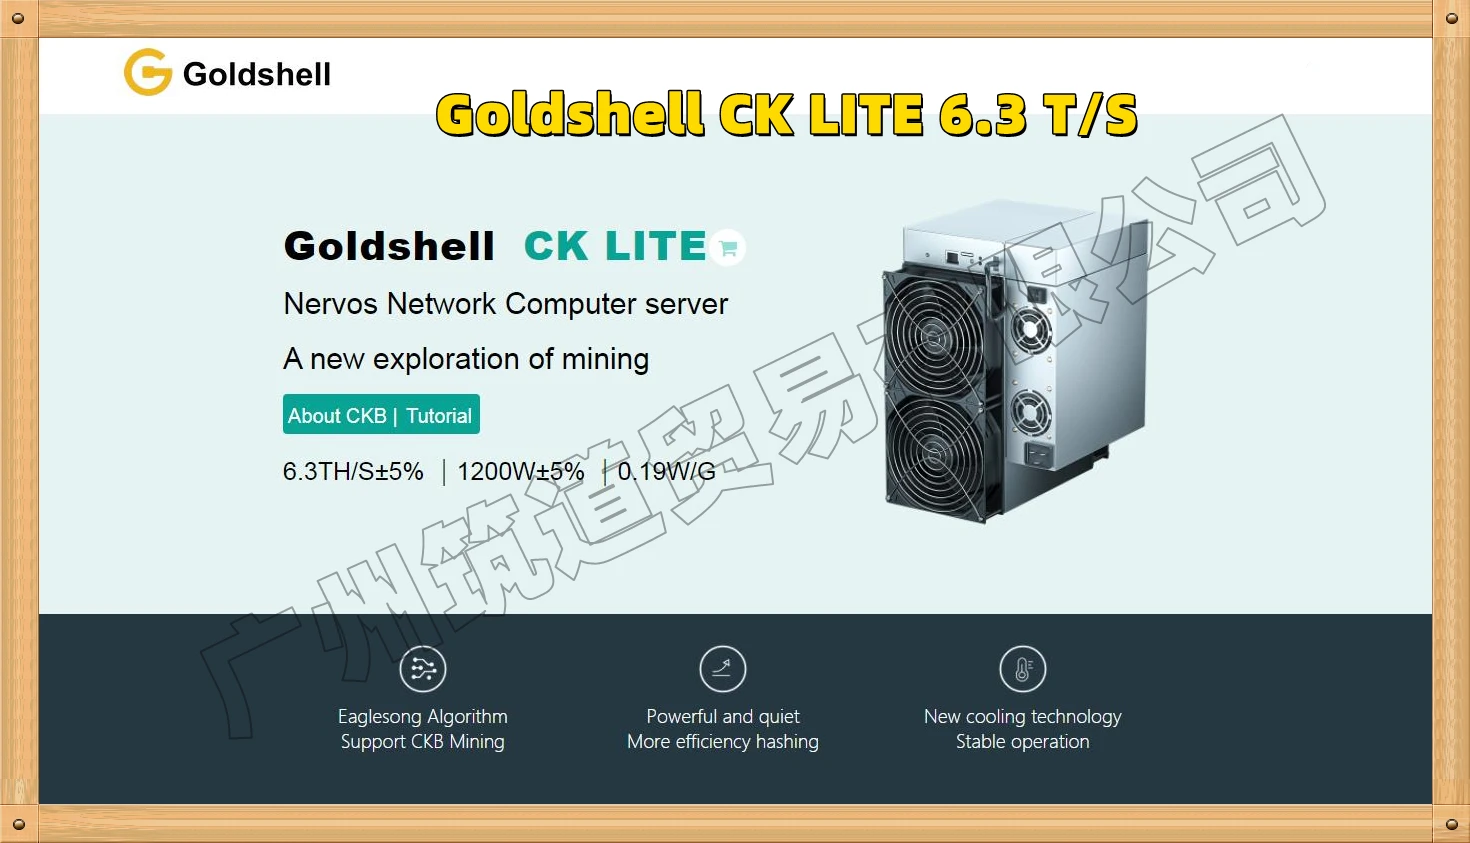 

Free Shipping New Goldshell CK-LITE 6300GH/s 1200W Nervos Network Miner With PSU Good Profits Better Than Antminer S19 95T 110T